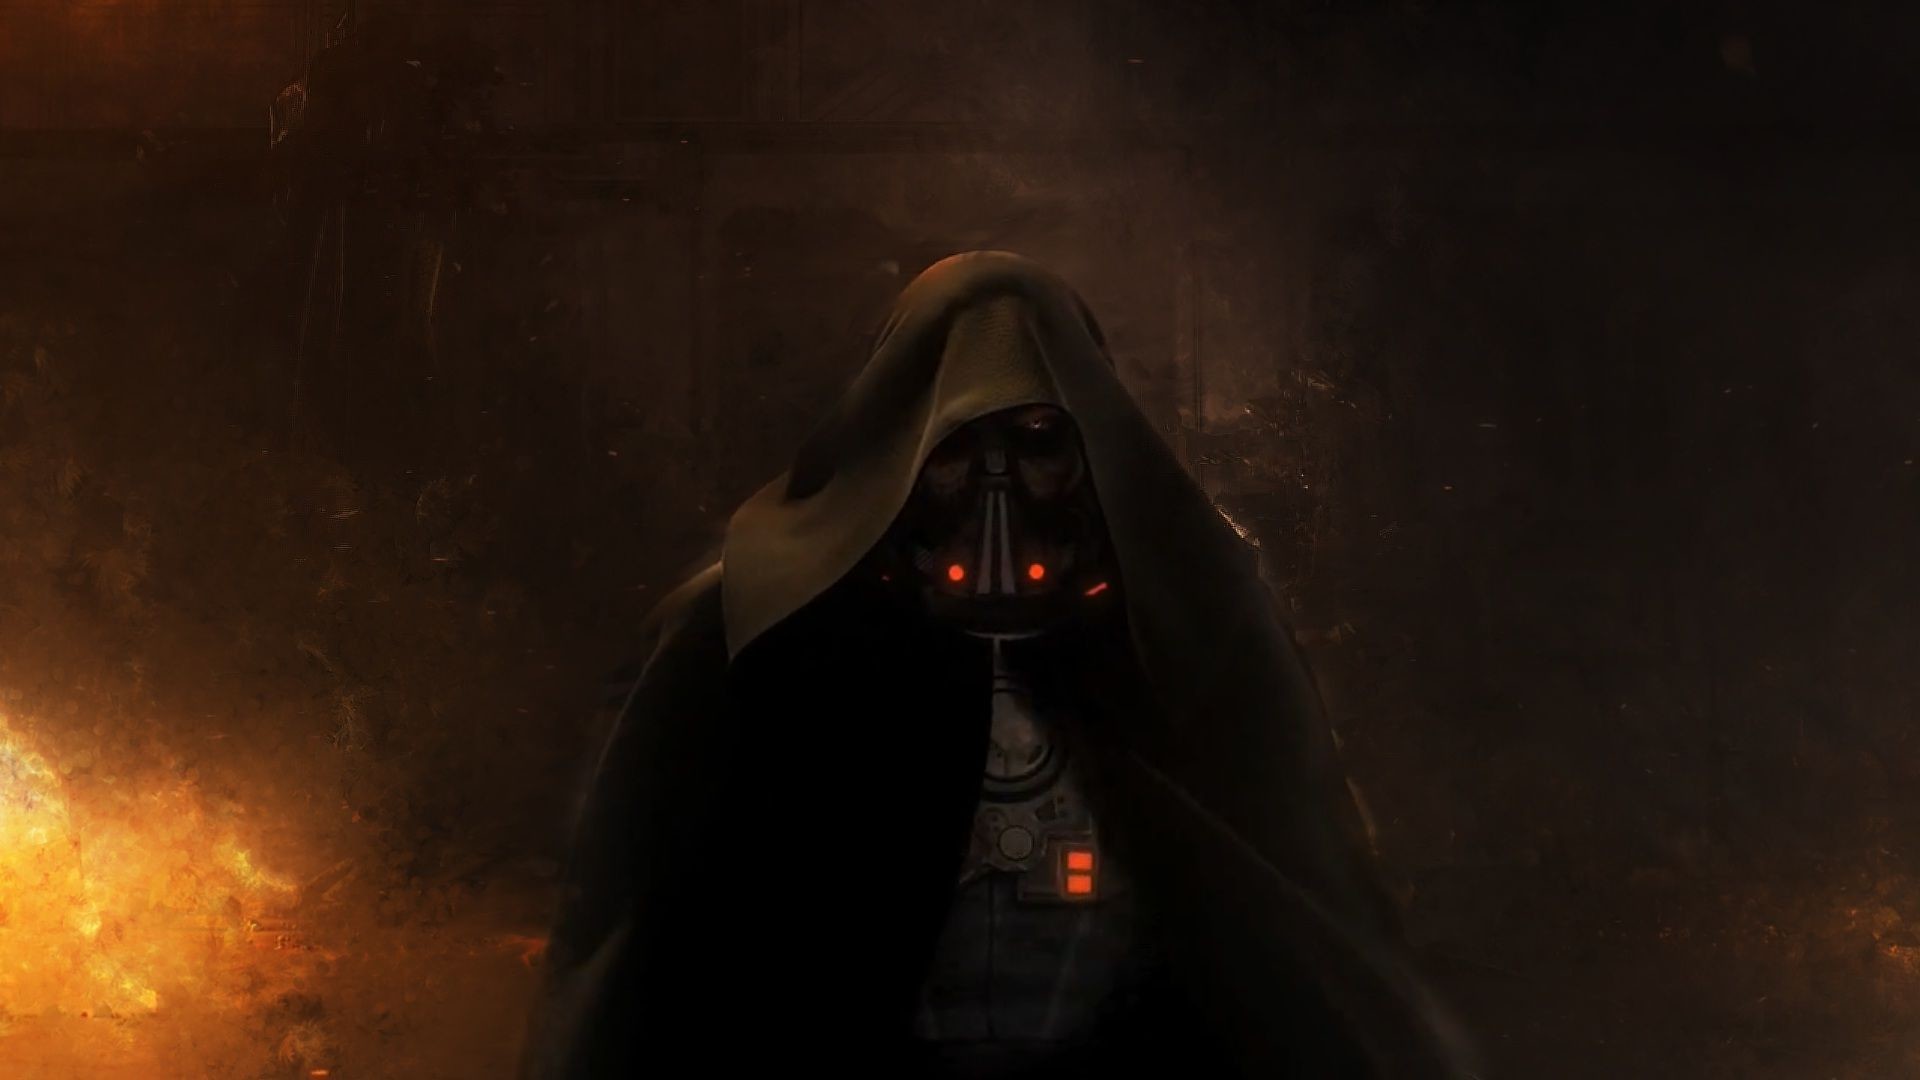 Star Wars Sith Wallpapers High Quality Resolution As Wallpaper HD